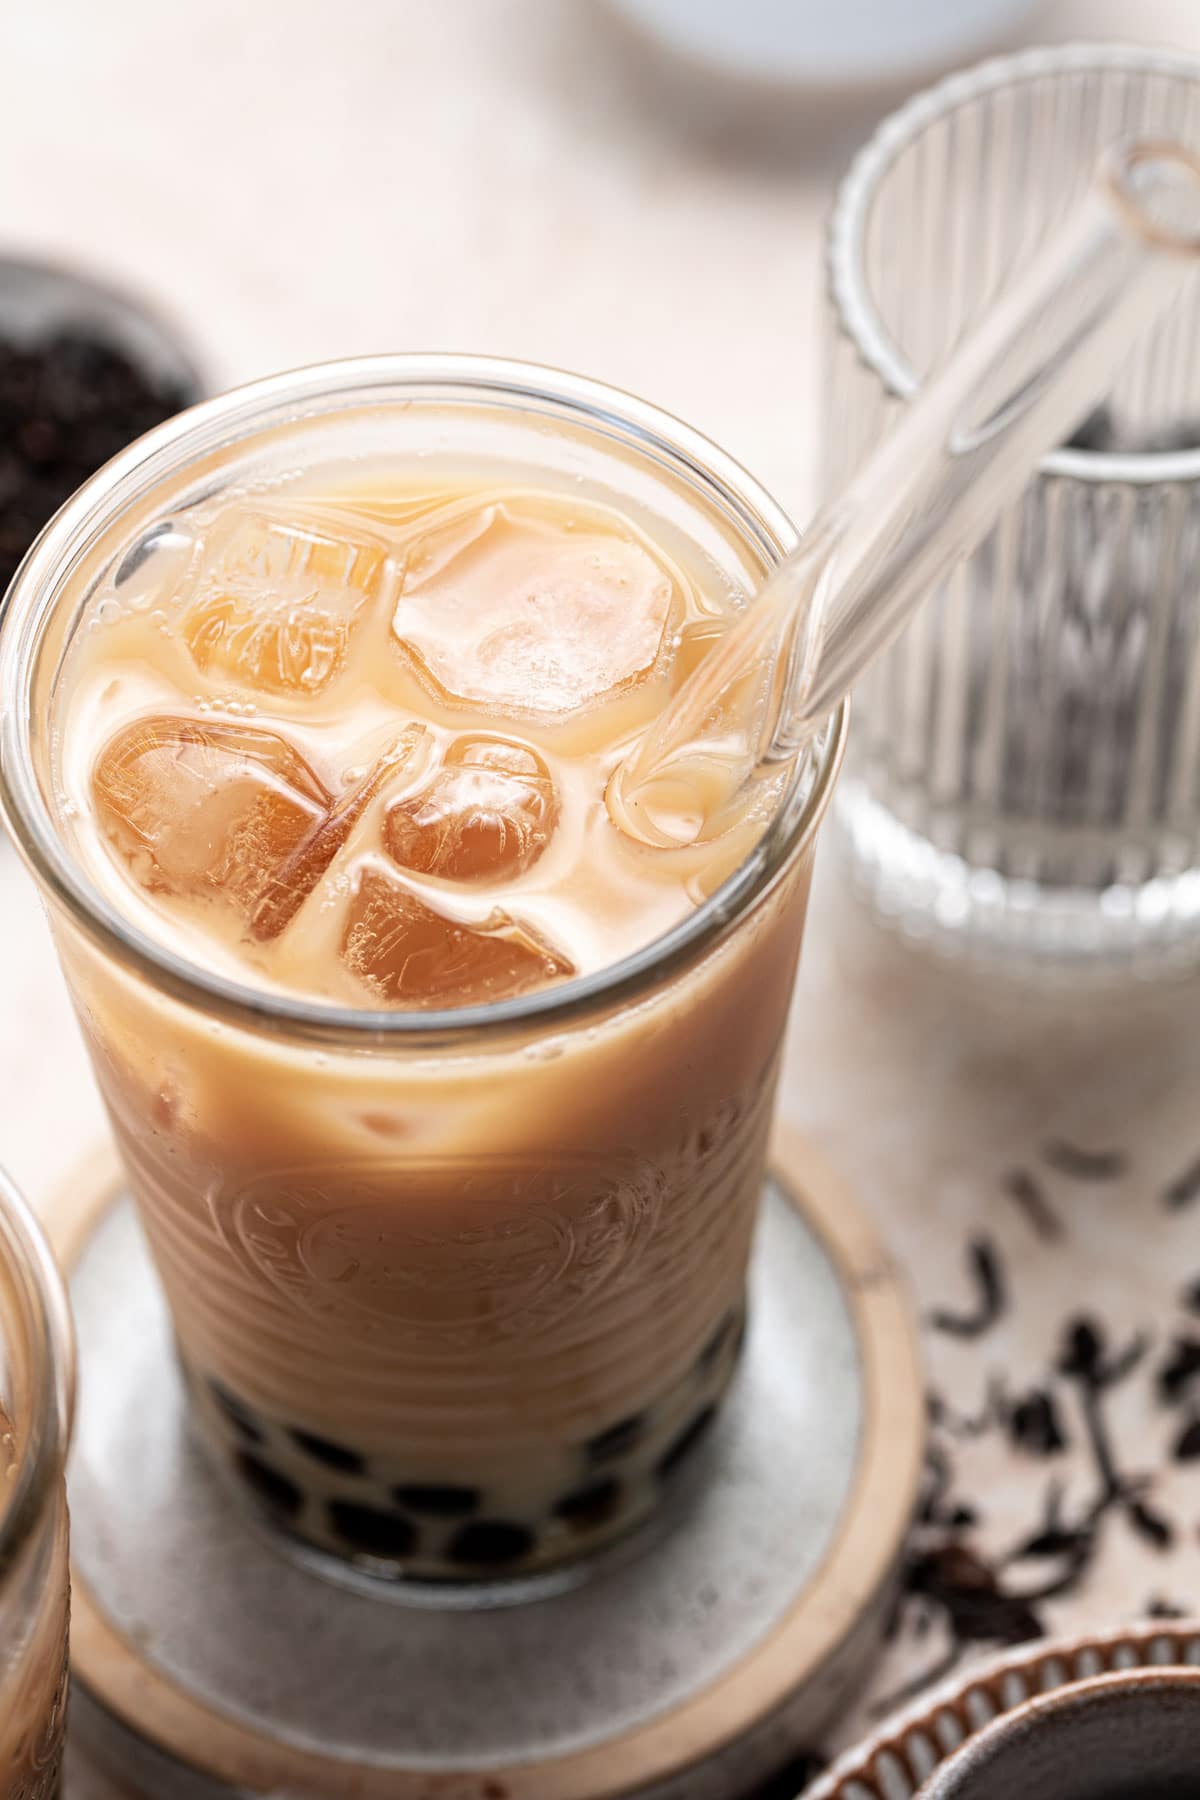 A side view of Oolong milk tea with a glass straw inserted in the middle.